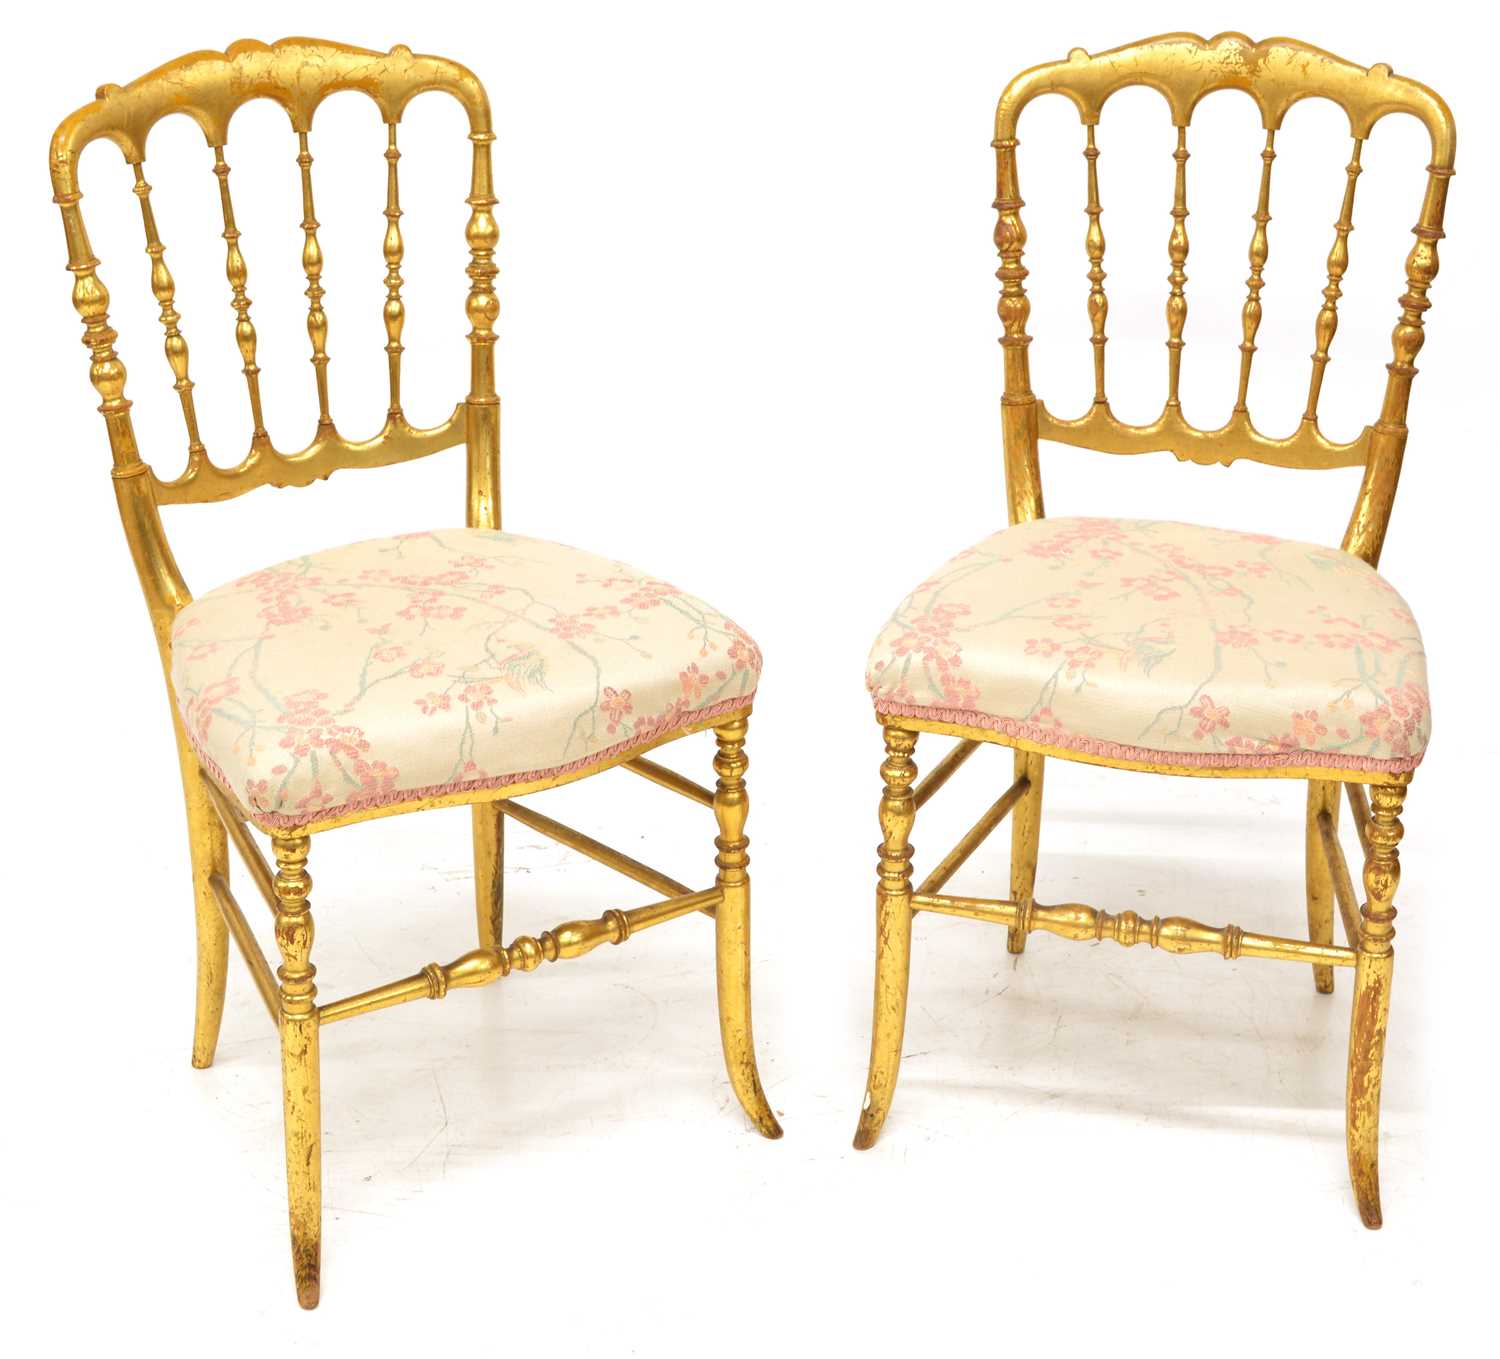 A pair of 19th century Belgian single chairs